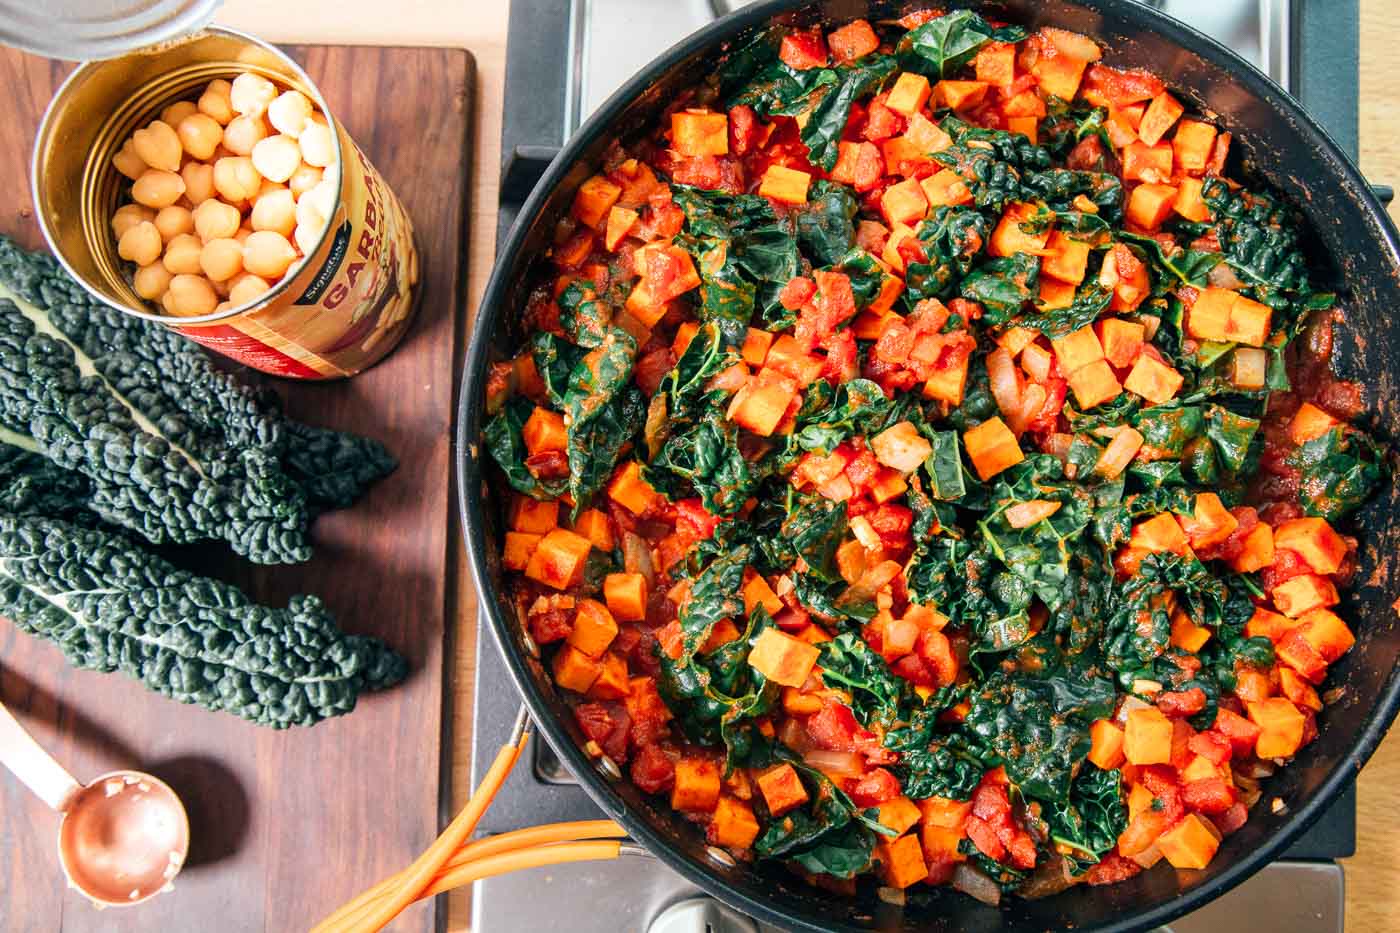 Kale, chickpeas, and tomatoes cooking in a skillet